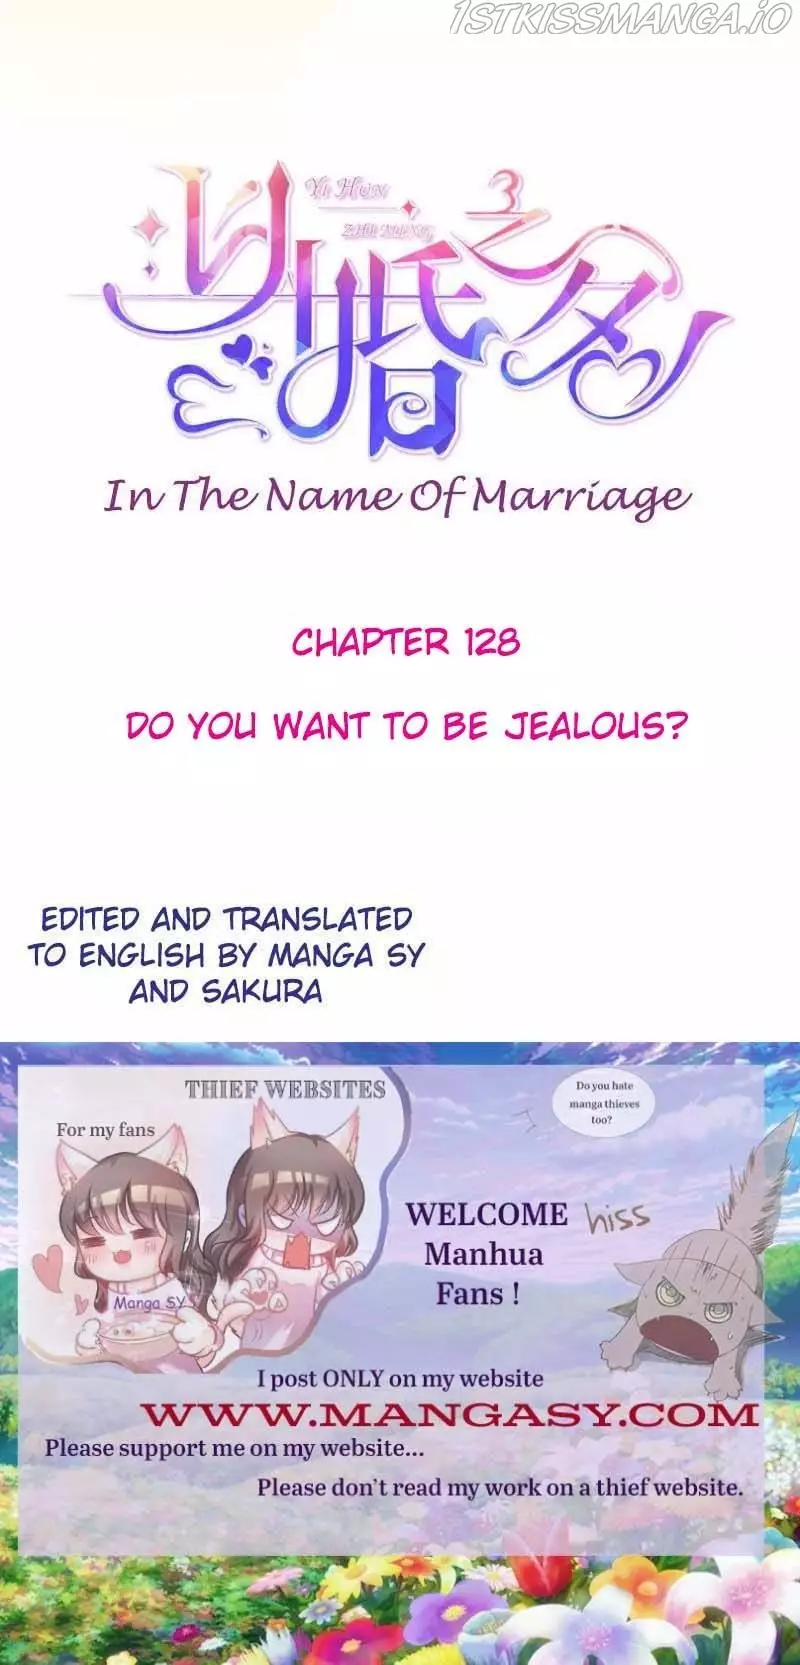 In The Name Of Marriage - 128 page 1-dc20cf81